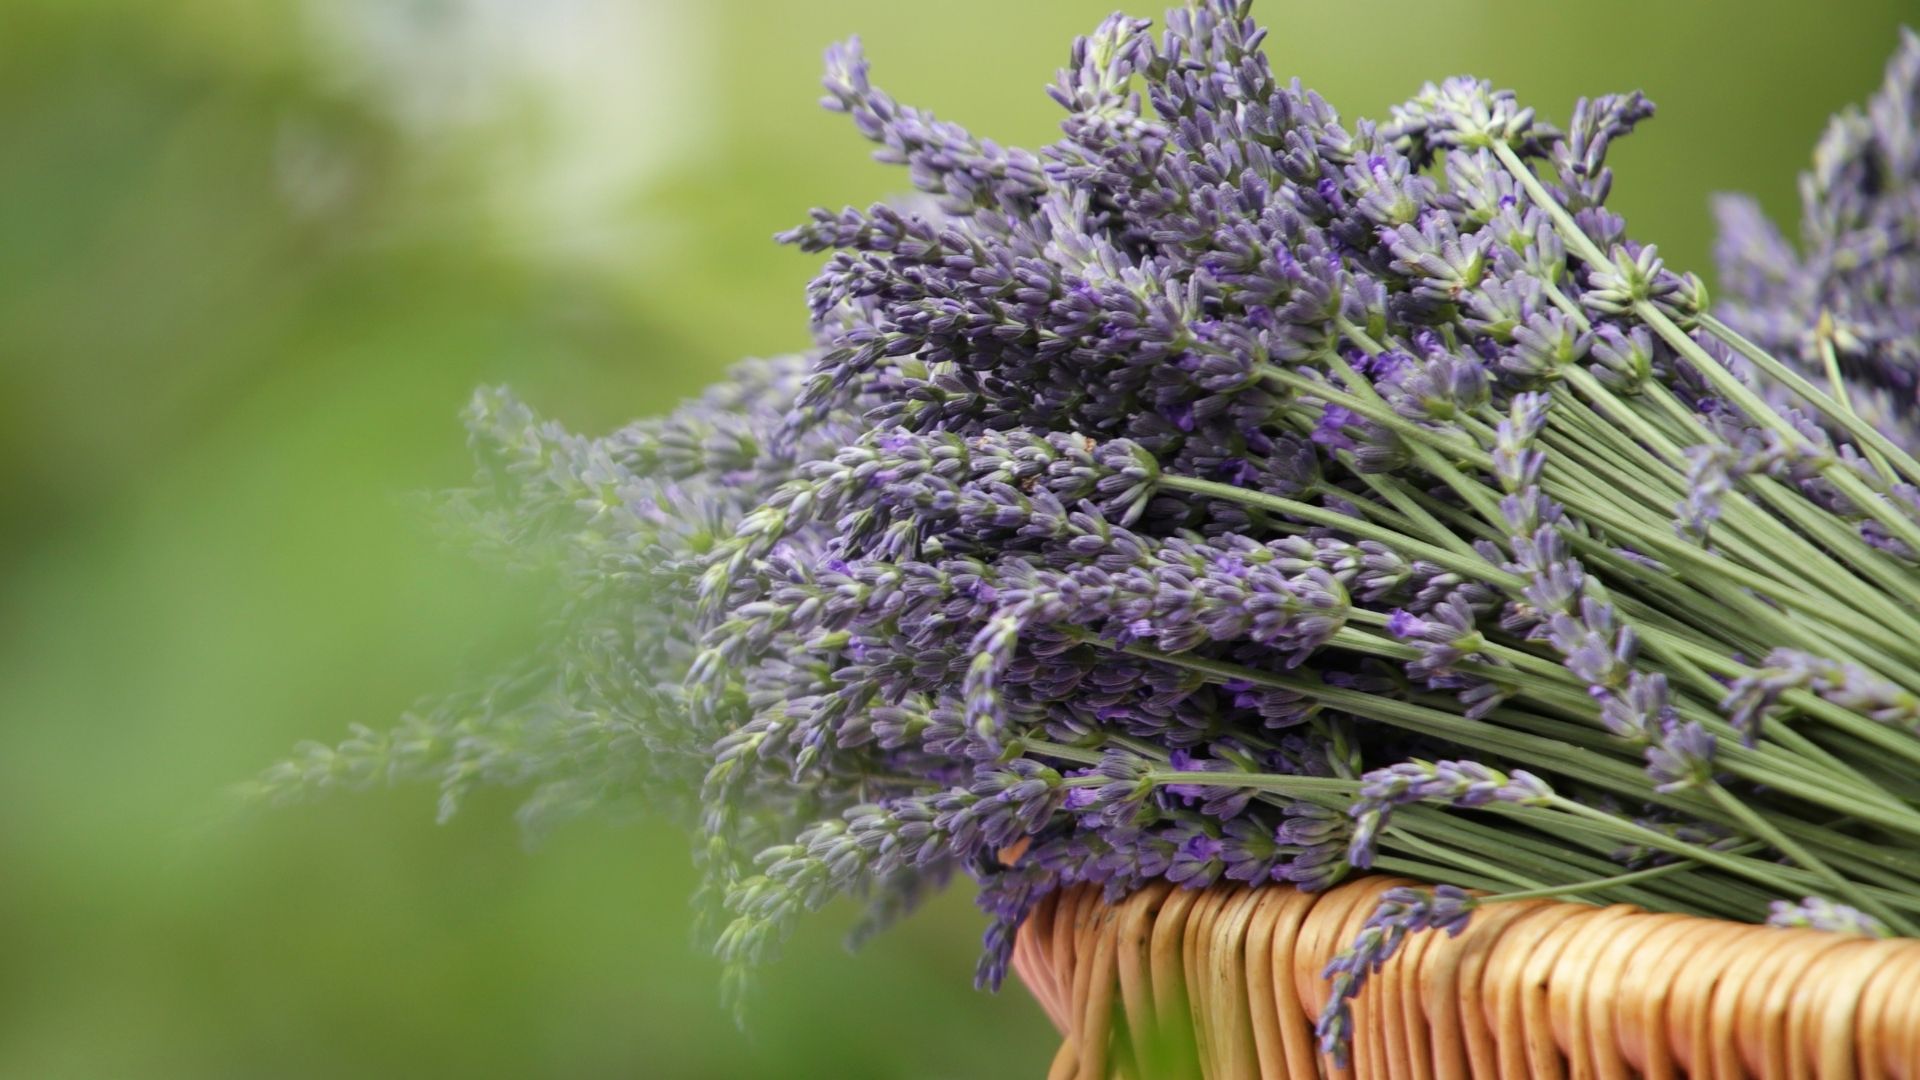 Lavender to vinegar - how to prevent moths ruining your best